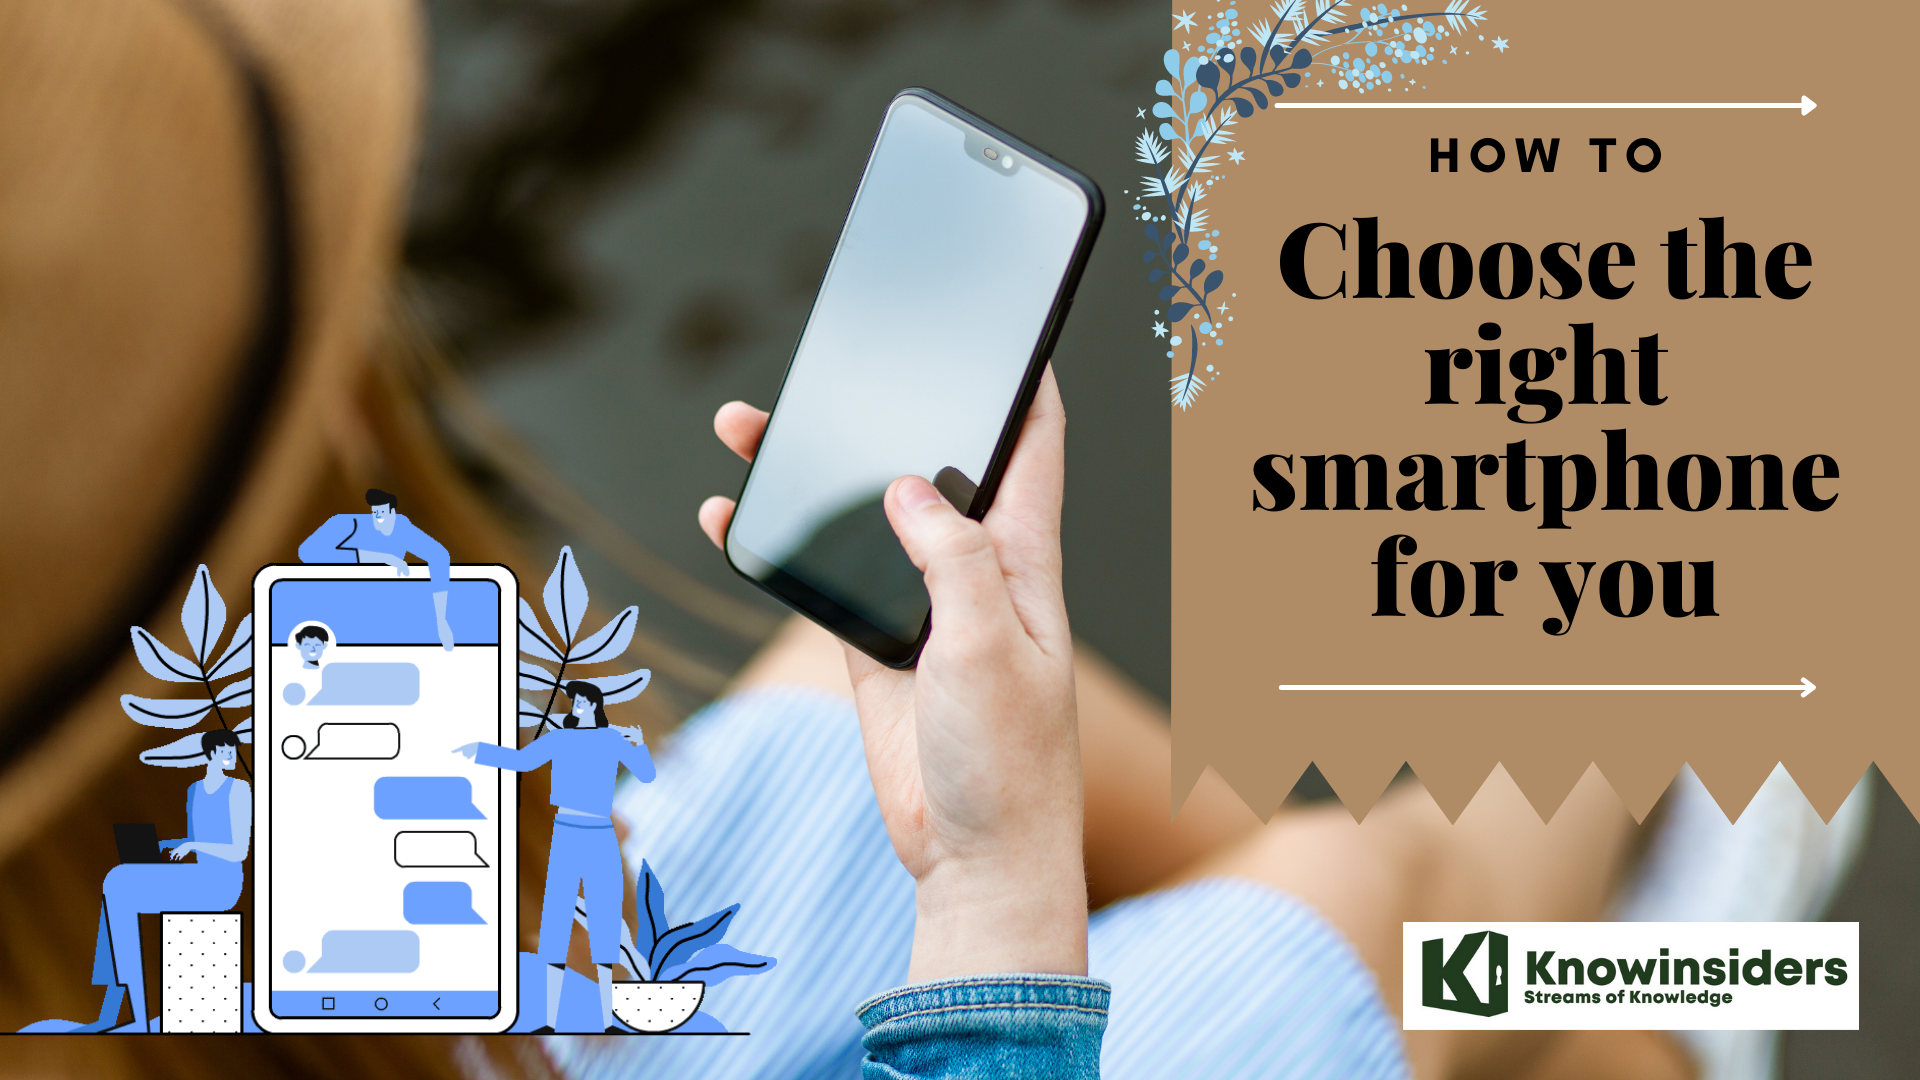 How To Choose The Right Smartphone: 7 Useful Tips